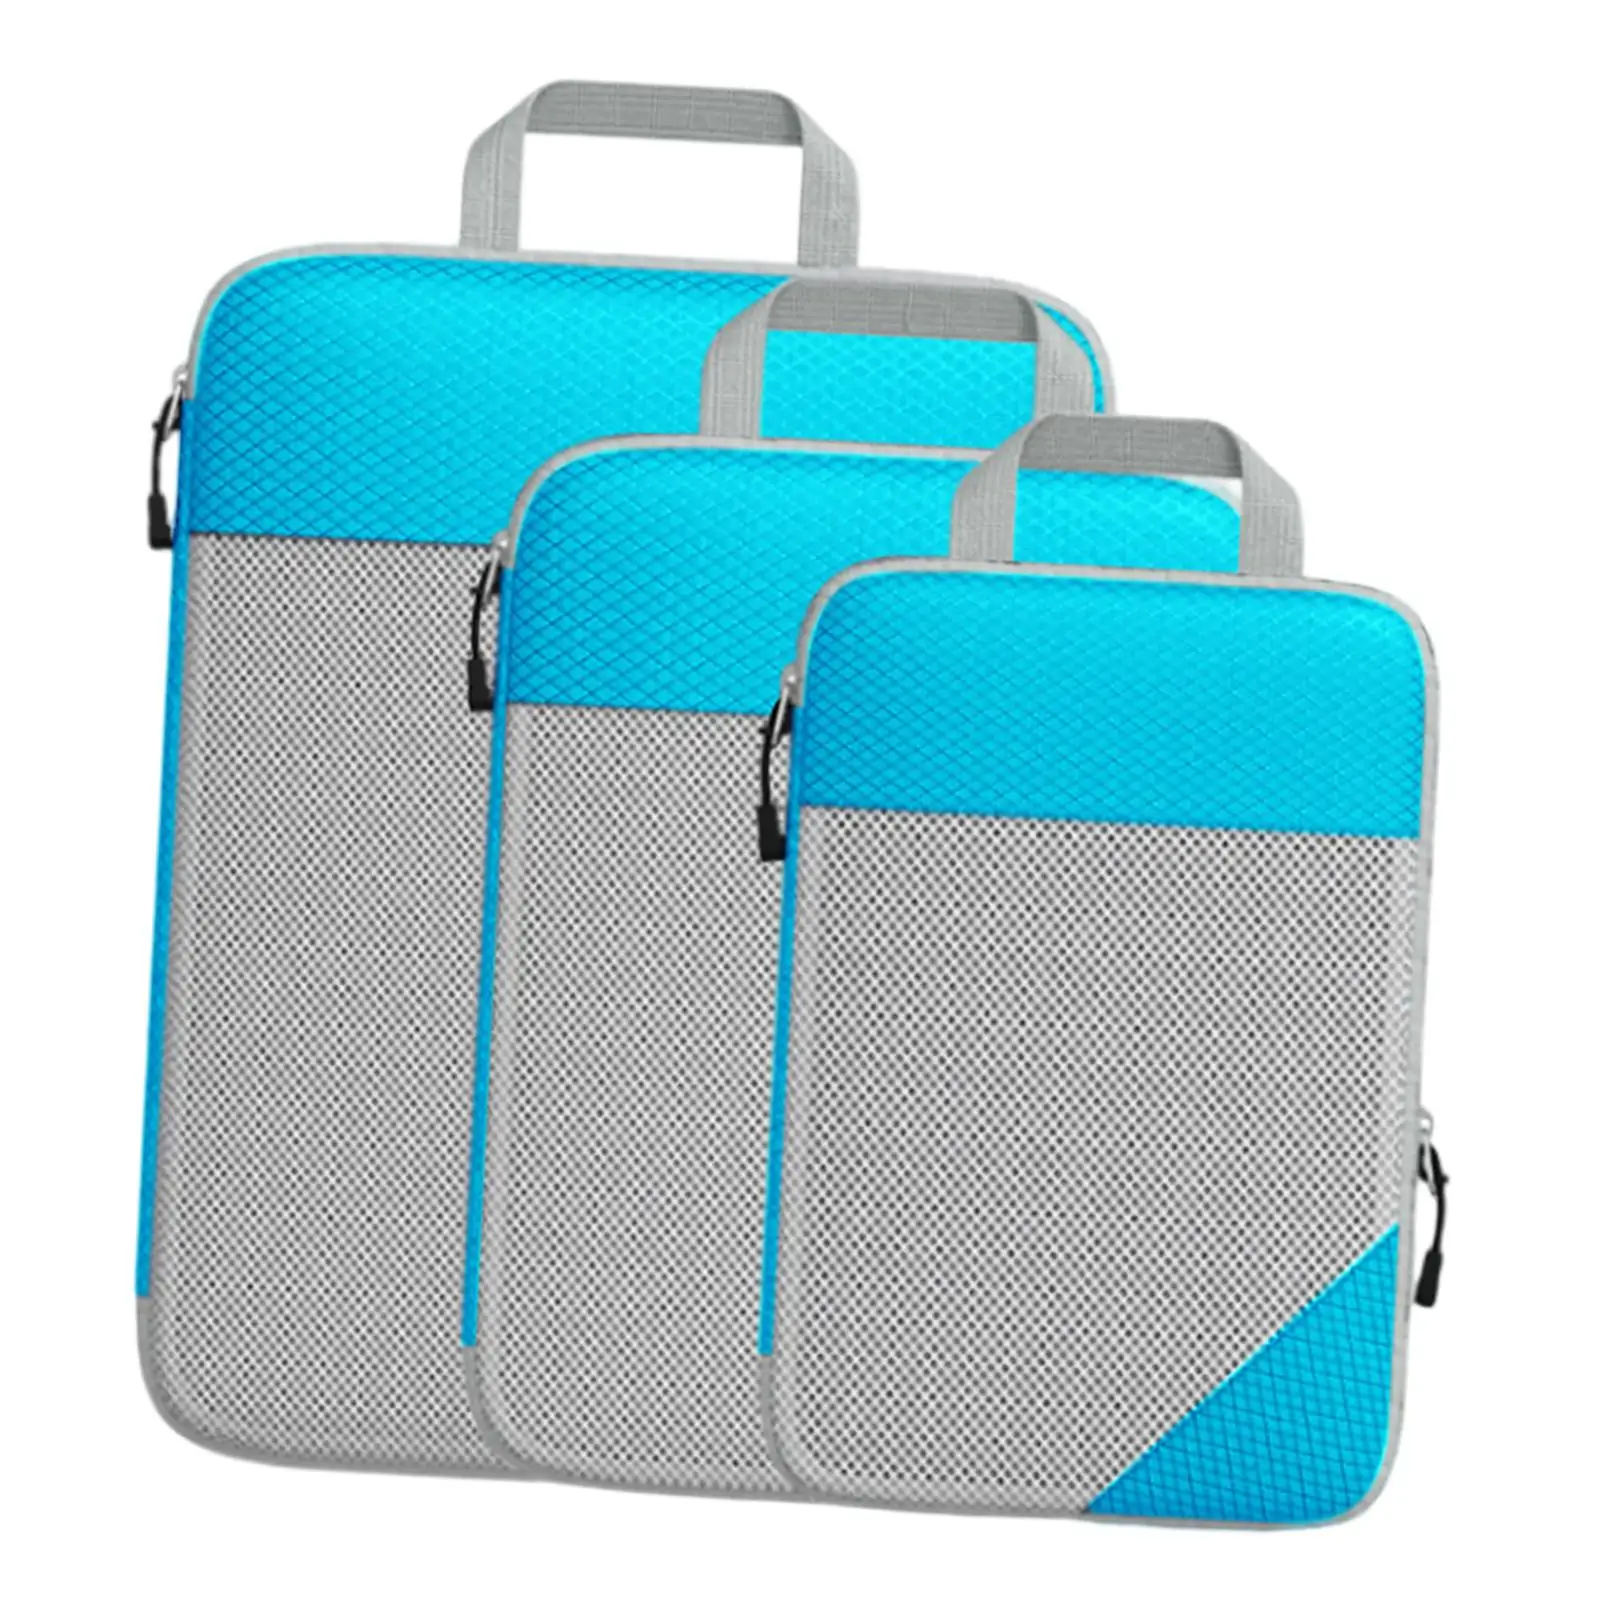 Set of 3 Packing Cubes Travel Organizers Mesh Storage Bags widening Hand Strap Water Resistant for Women and Men Space Saving